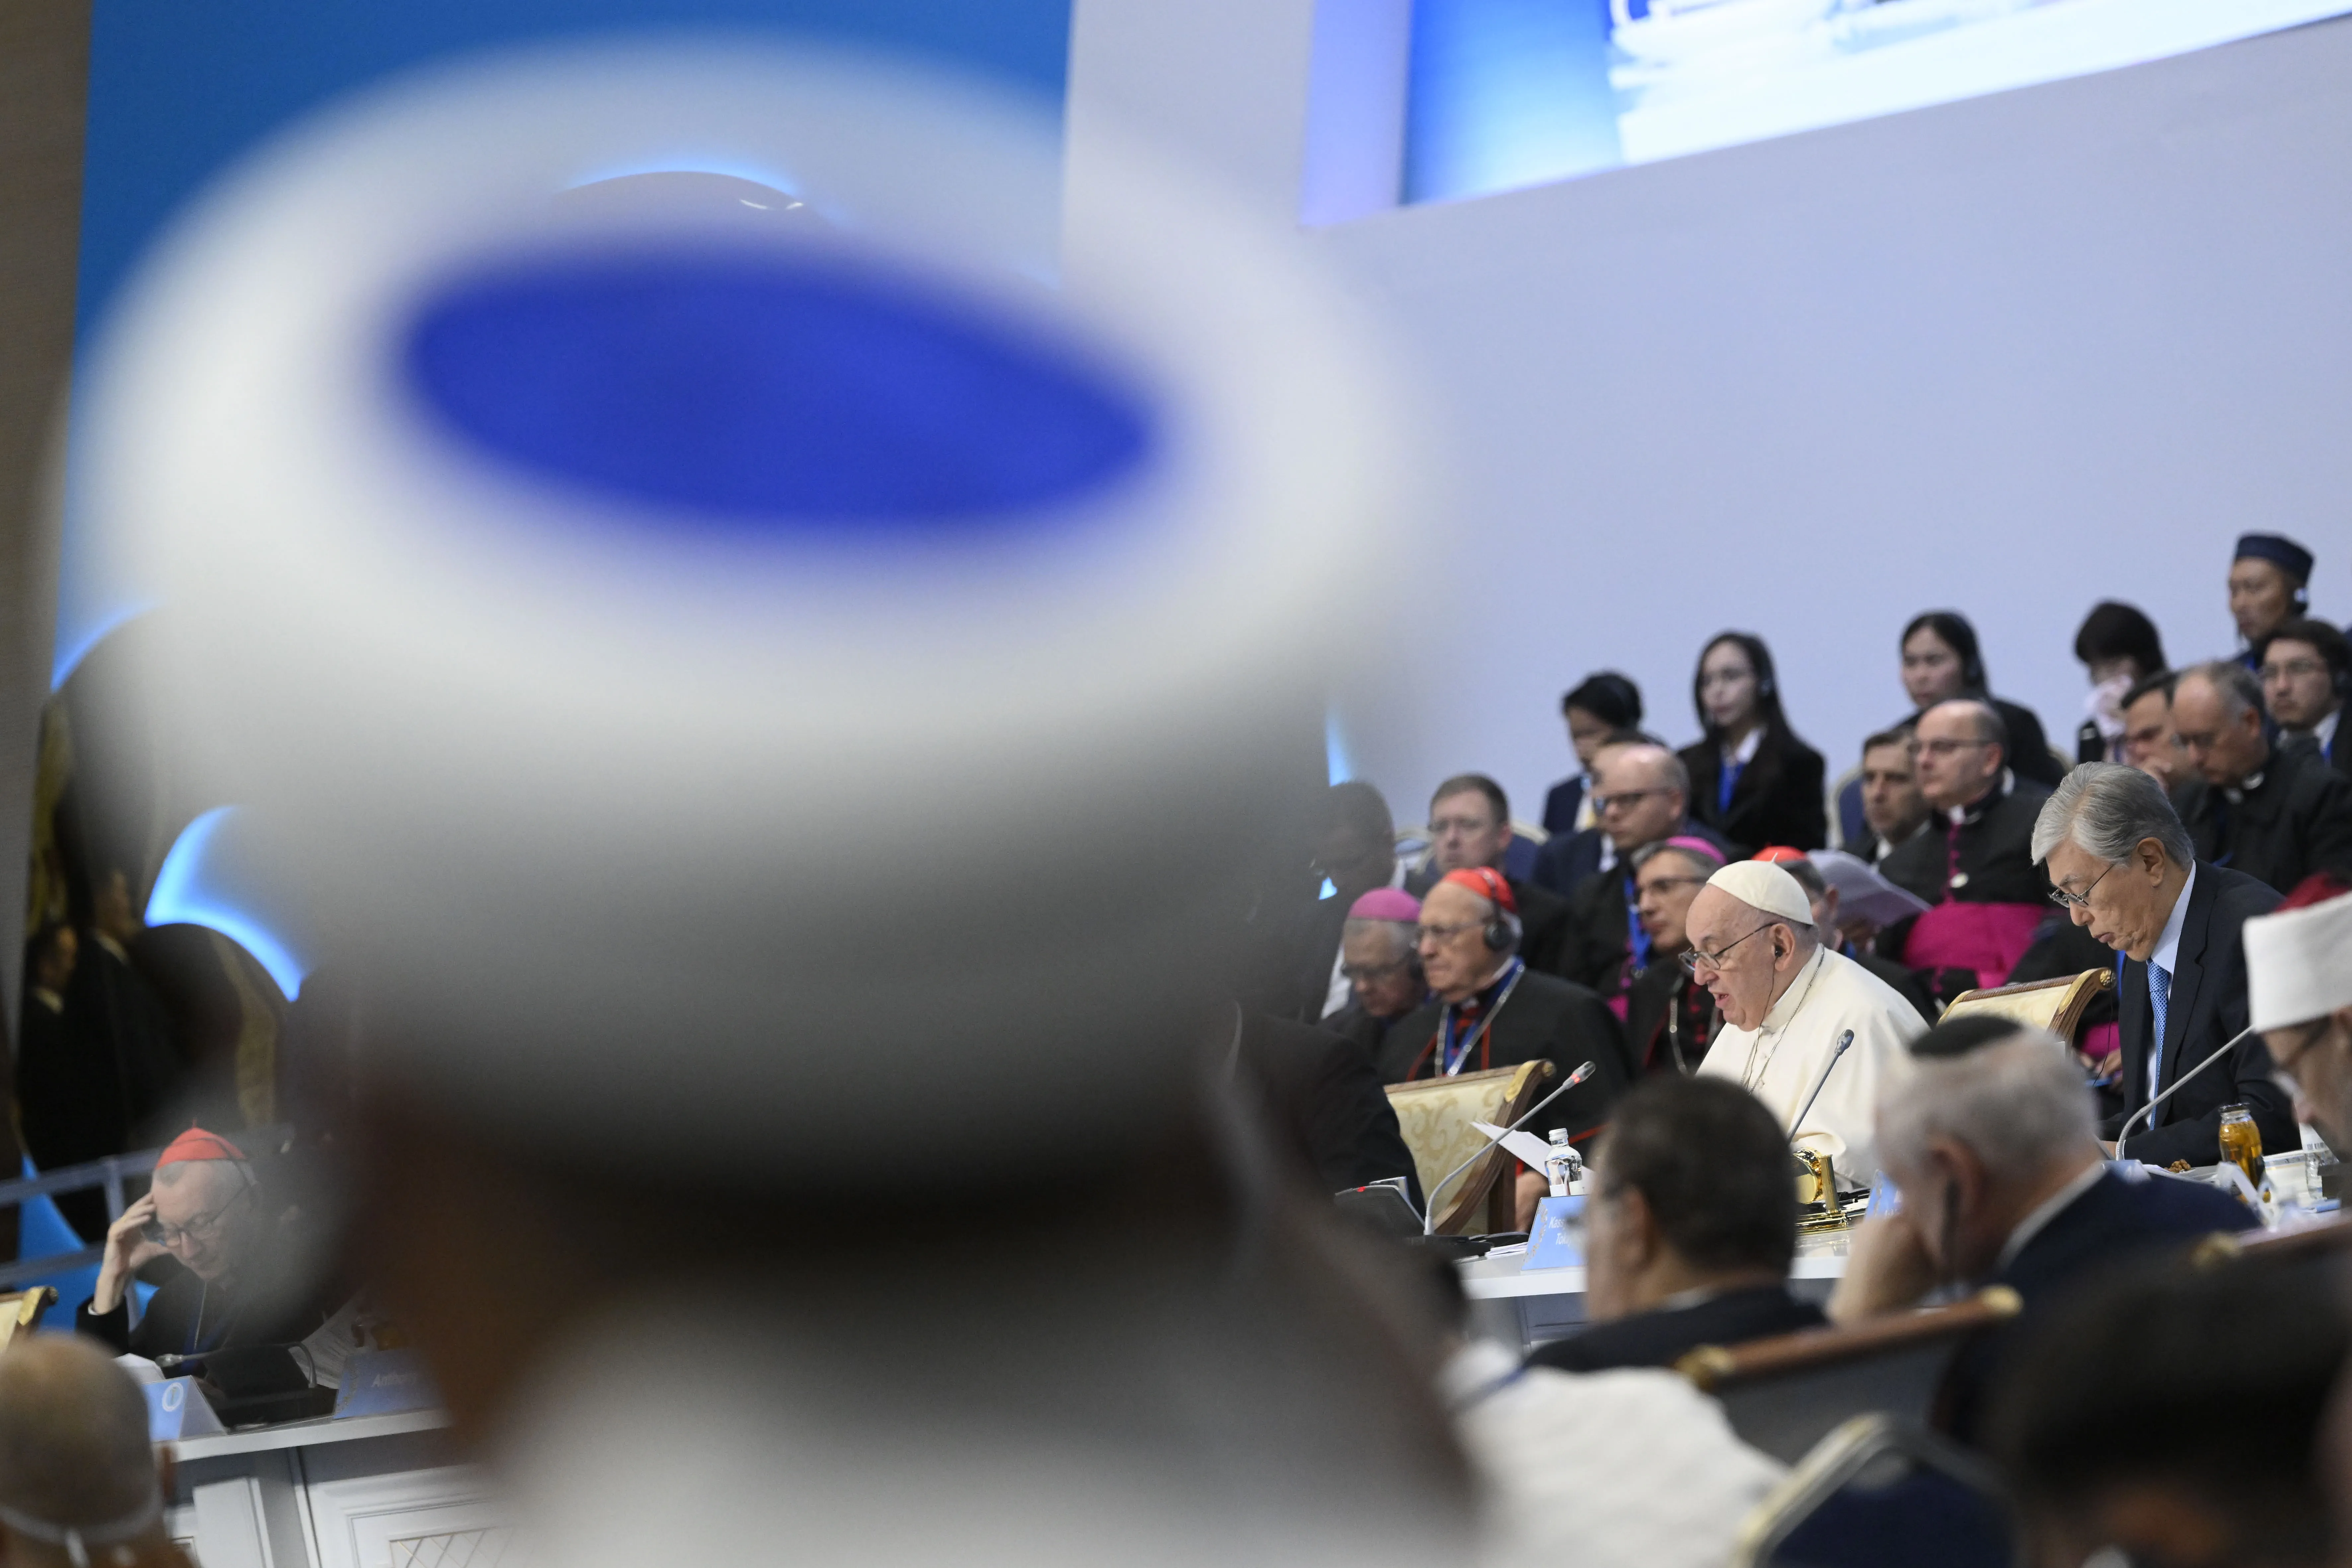 Pope Francis speaking at the 7th Congress of Leaders of World and Traditional Religions in Nur-Sultan, Kazakhstan, Sept. 15, 2022.?w=200&h=150